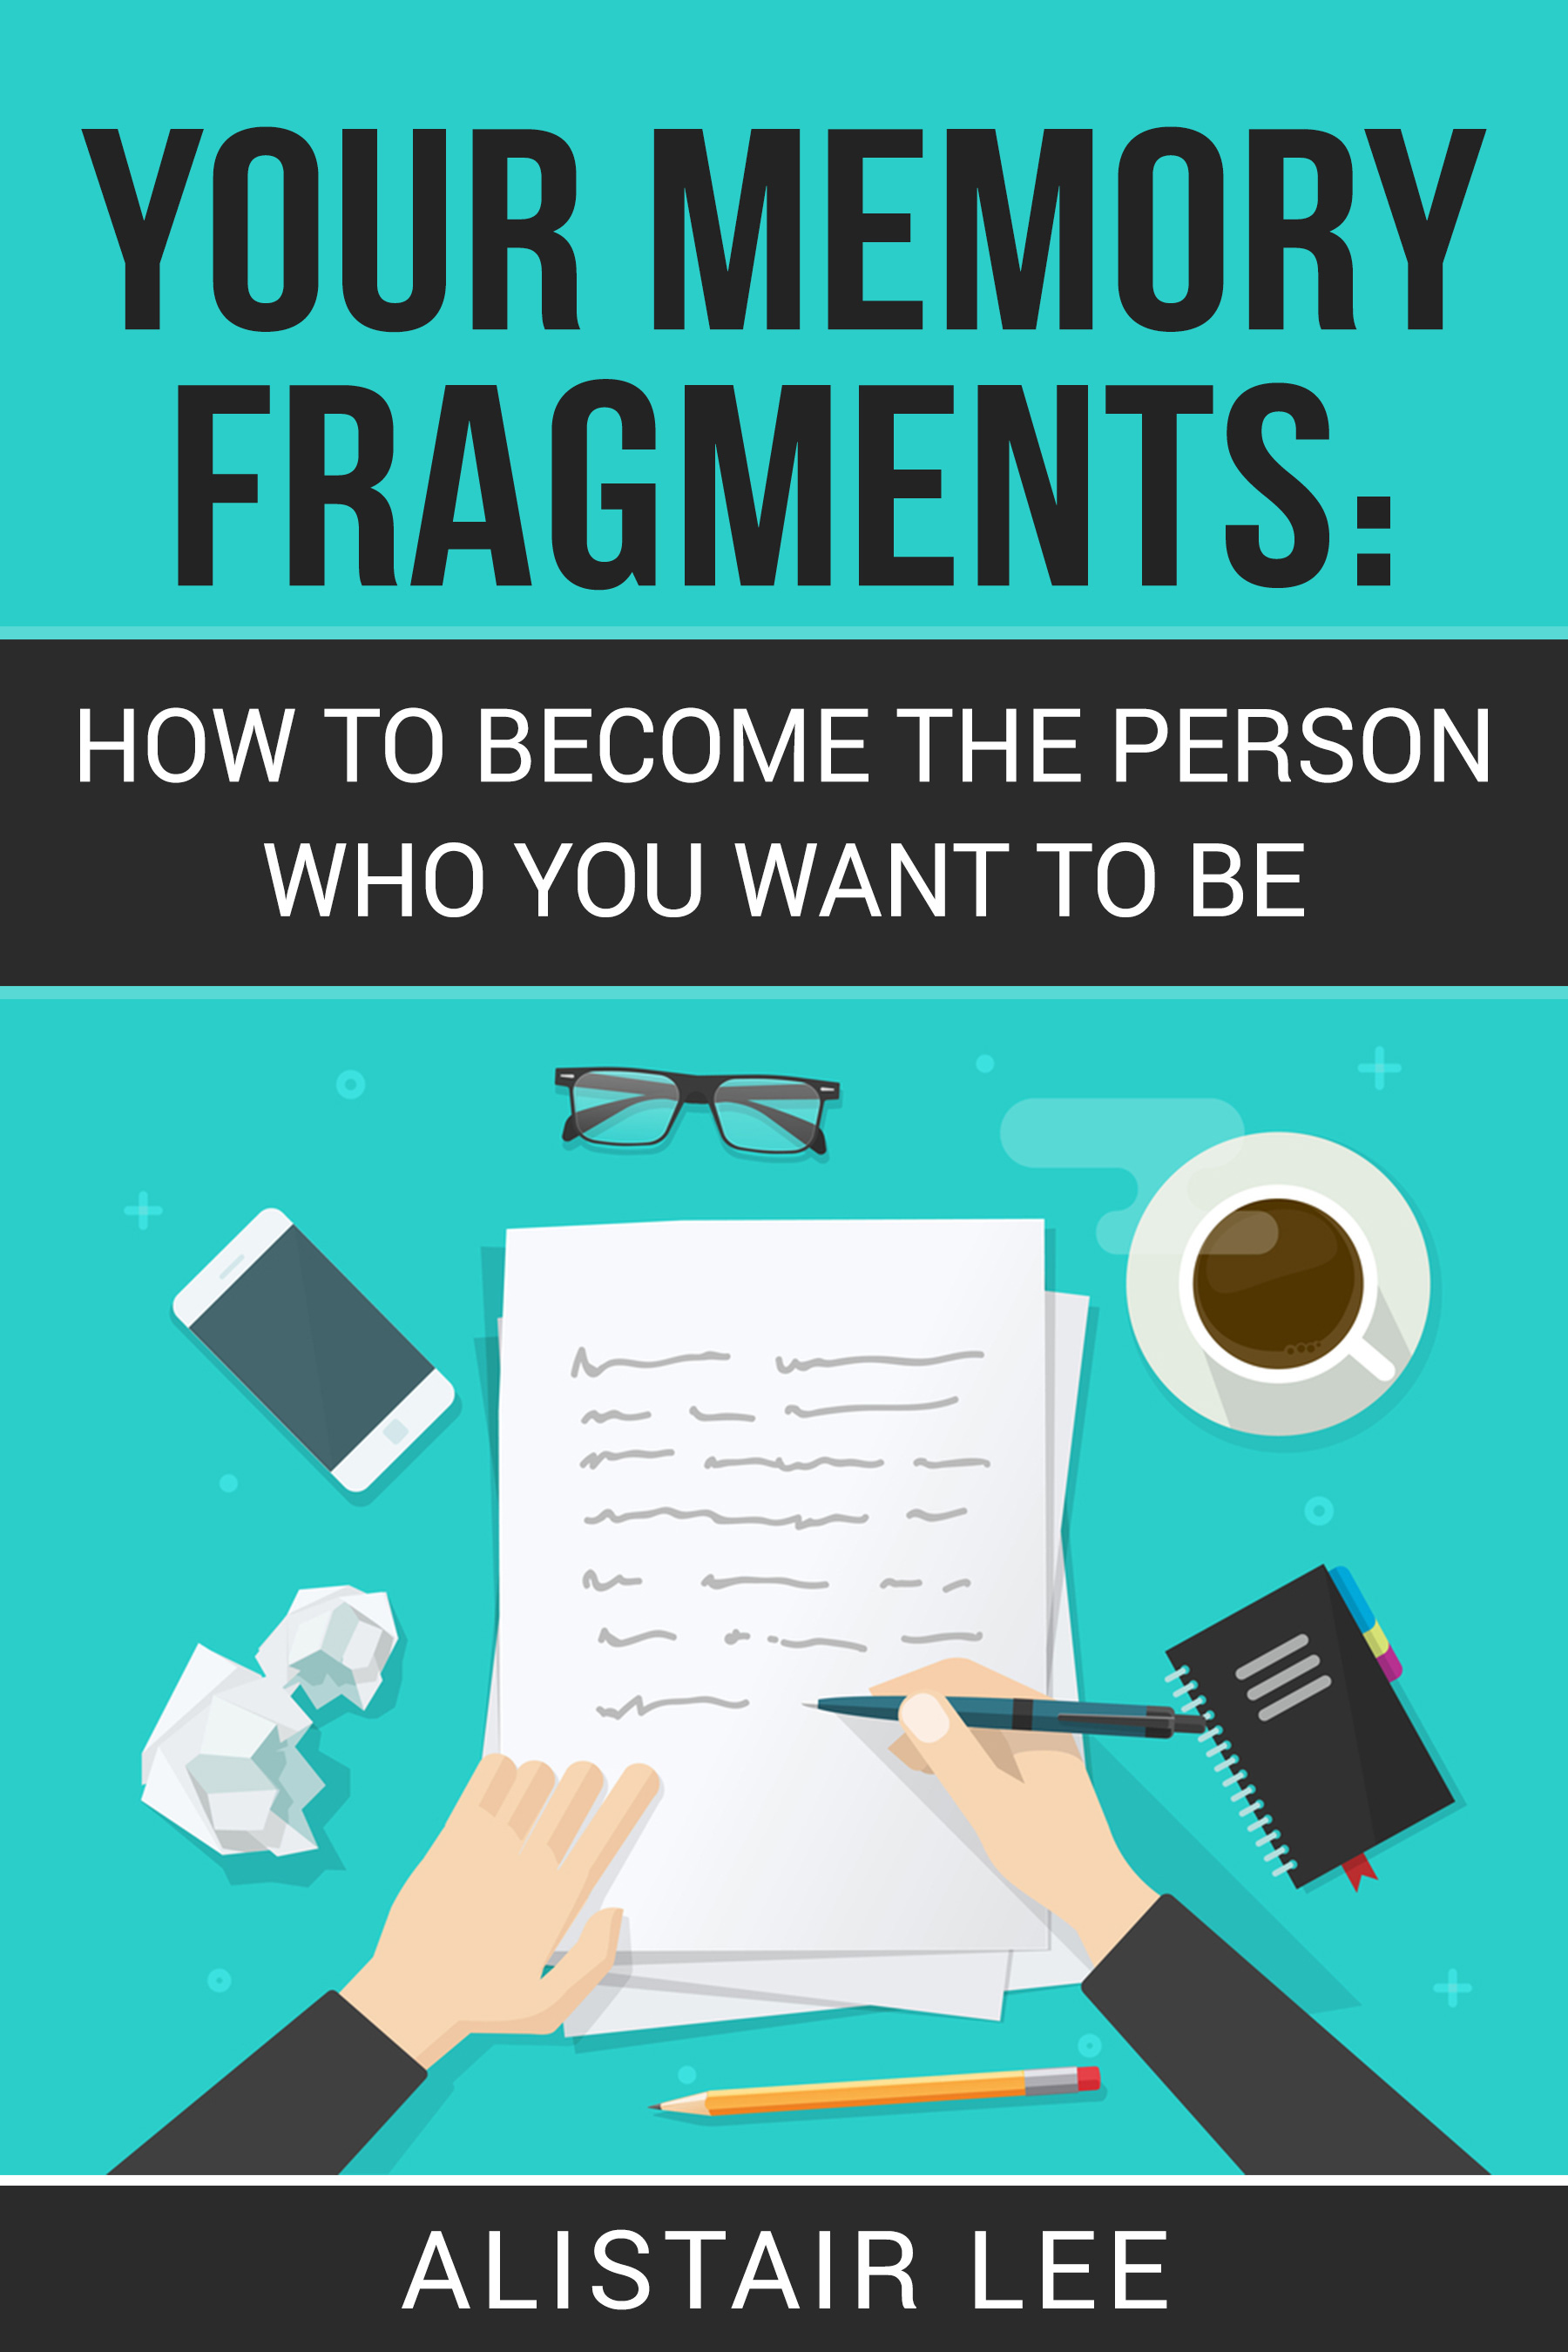 FREE: Your Memory Fragments: How to Become the Person Who You Want to Be by Alistair Lee